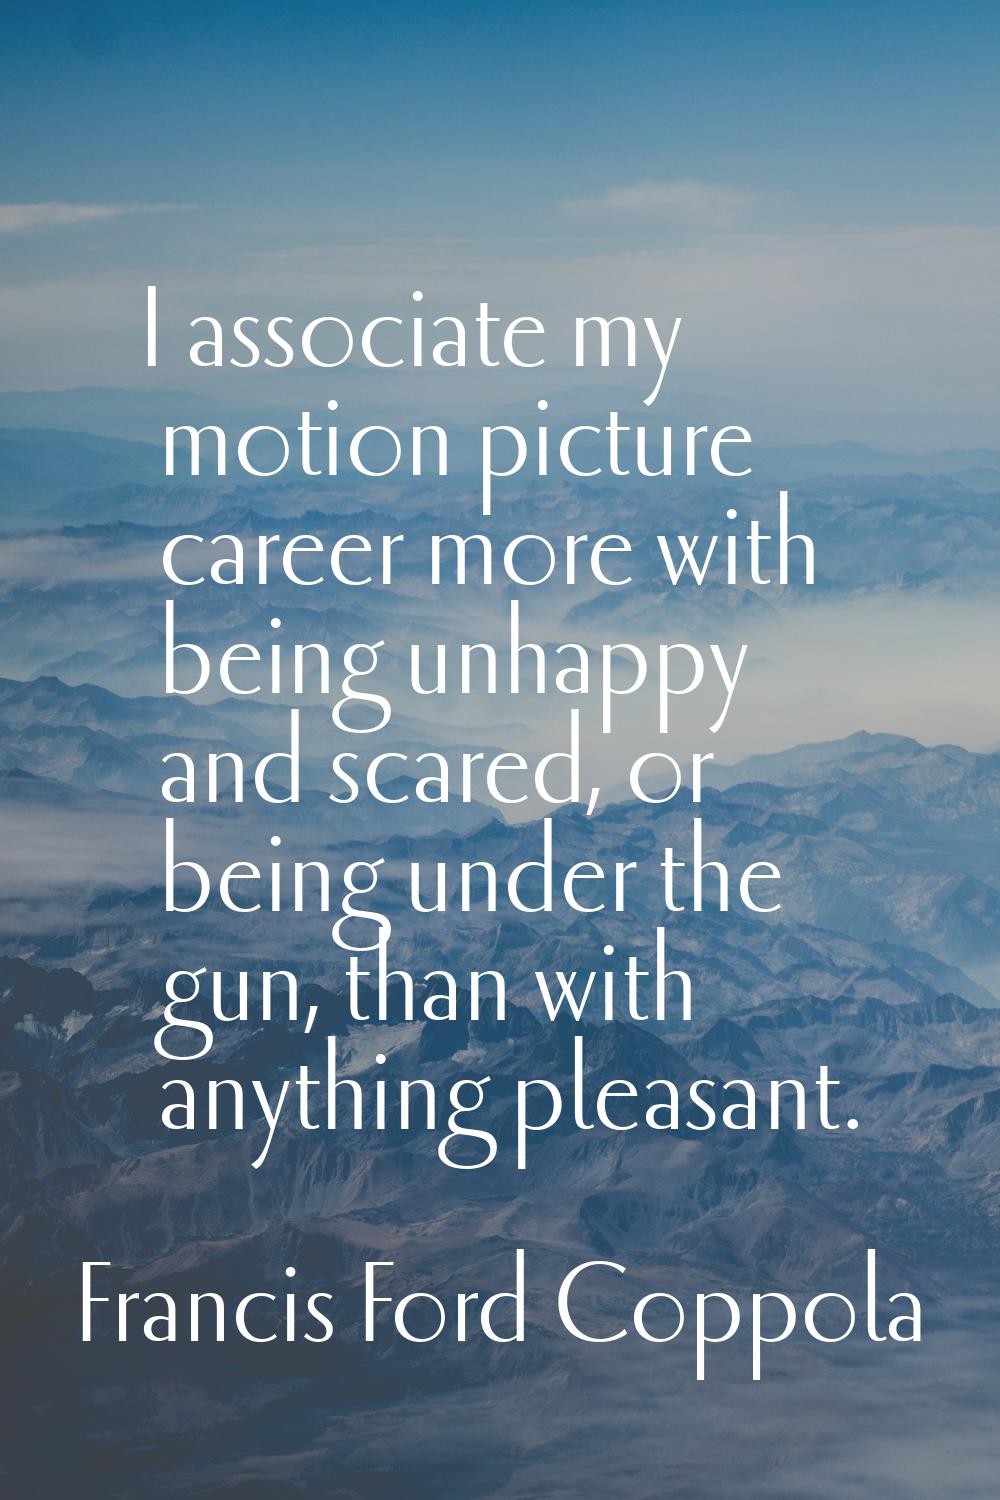 I associate my motion picture career more with being unhappy and scared, or being under the gun, th